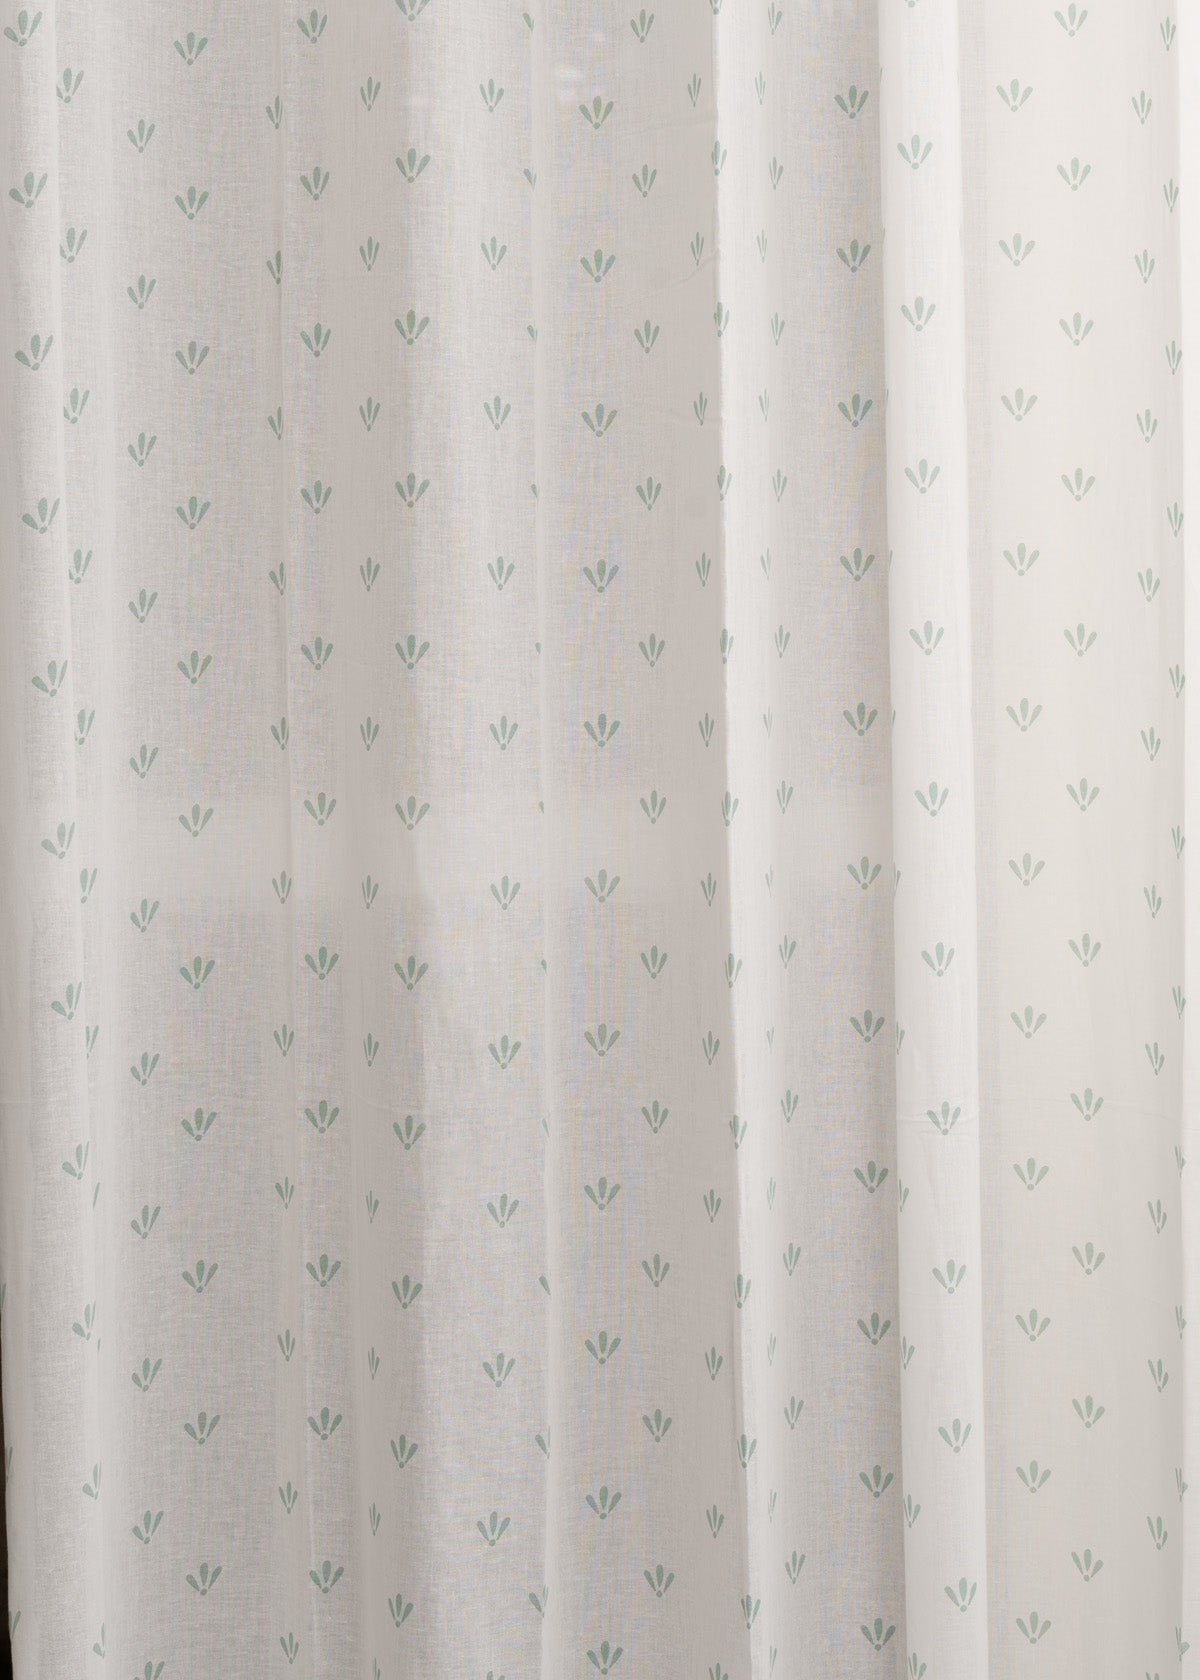 Aniseed 100% cotton floral sheer curtain for living room - Light filtering - Nile Blue - Pack of 1